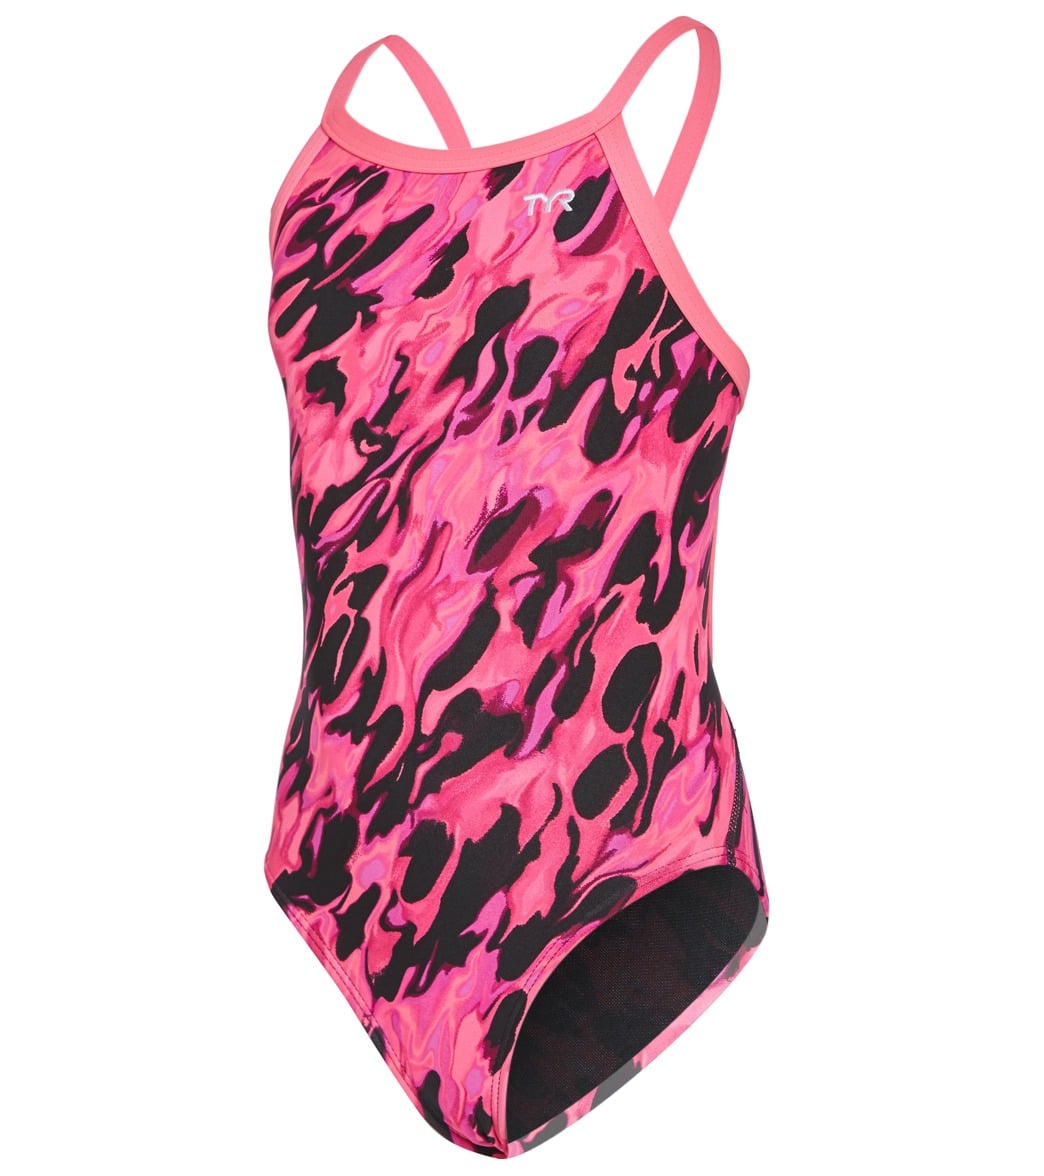 TYR Girls' Draco Diamondfit One Piece Swimsuit at SwimOutlet.com - Free ...